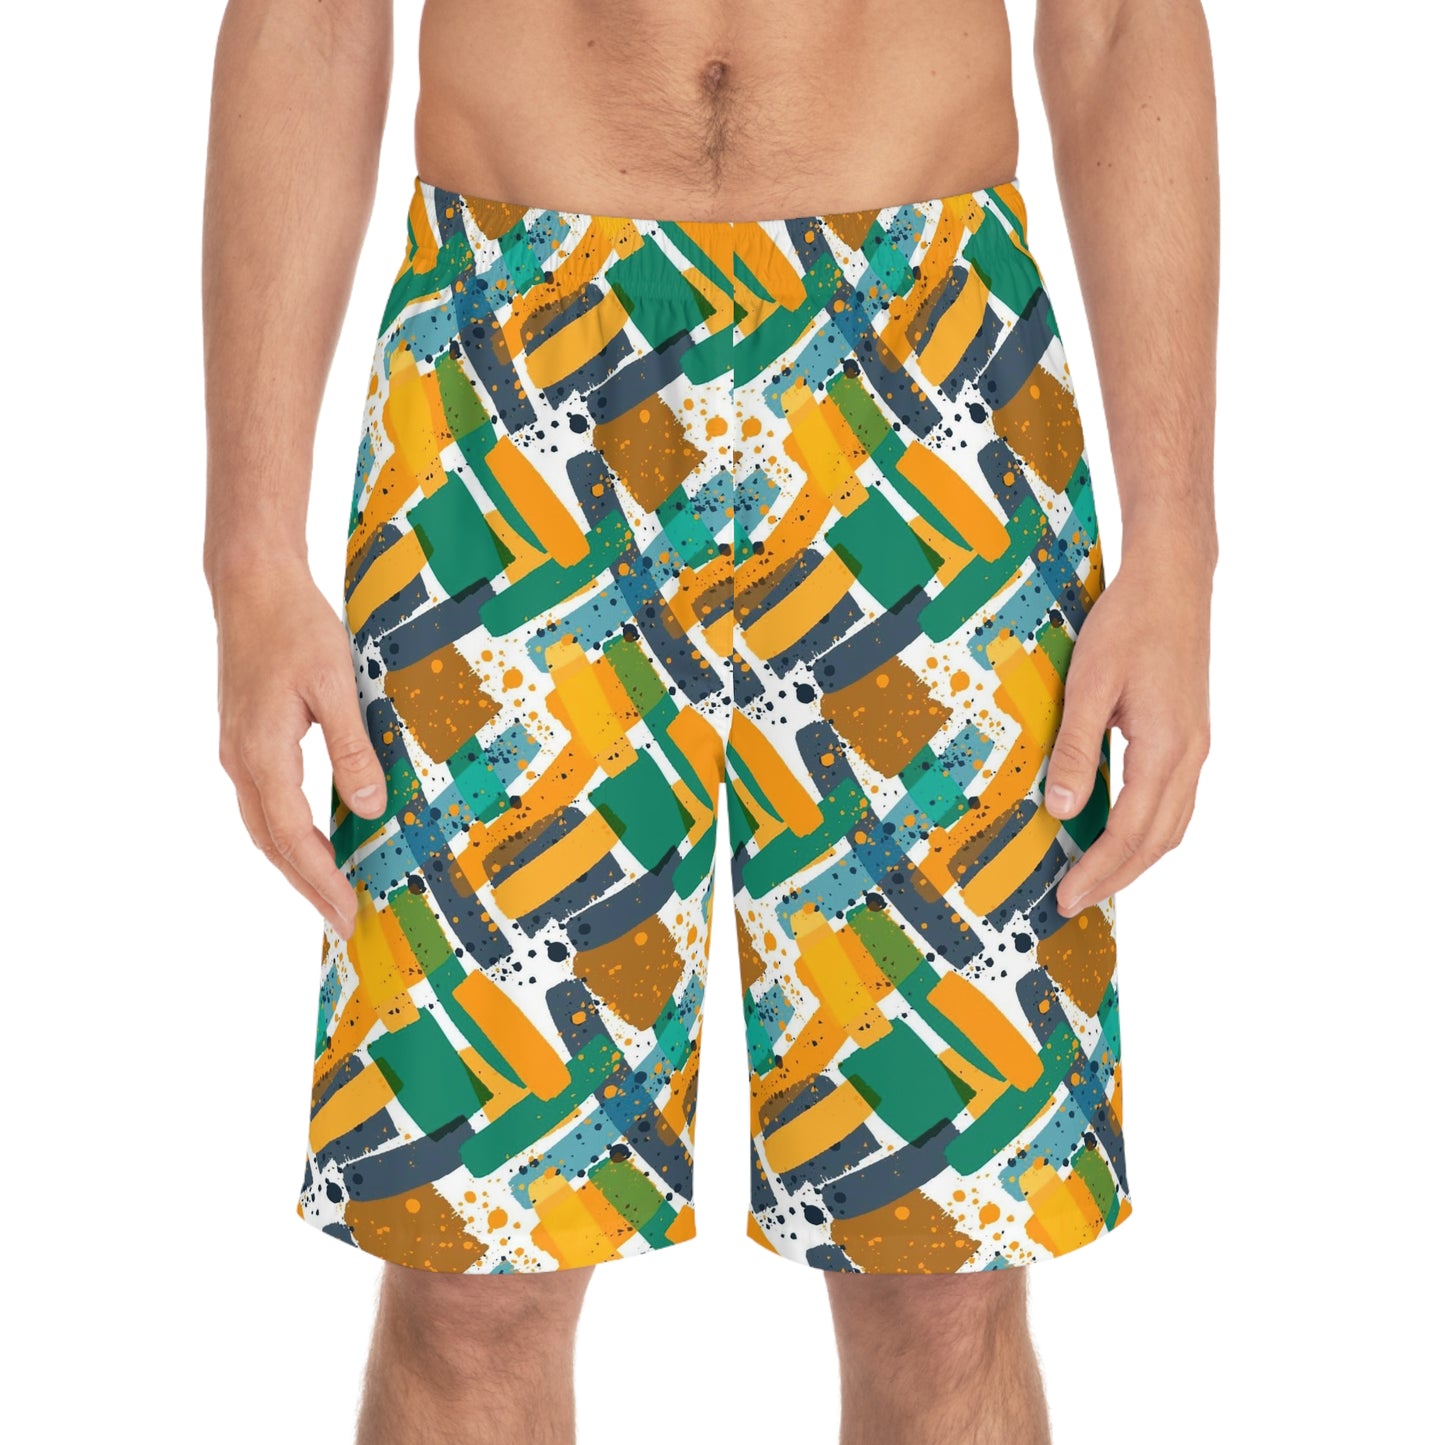 Niccie's Men's AOP Board Shorts - Stylish Sports Pattern for Active Comfort